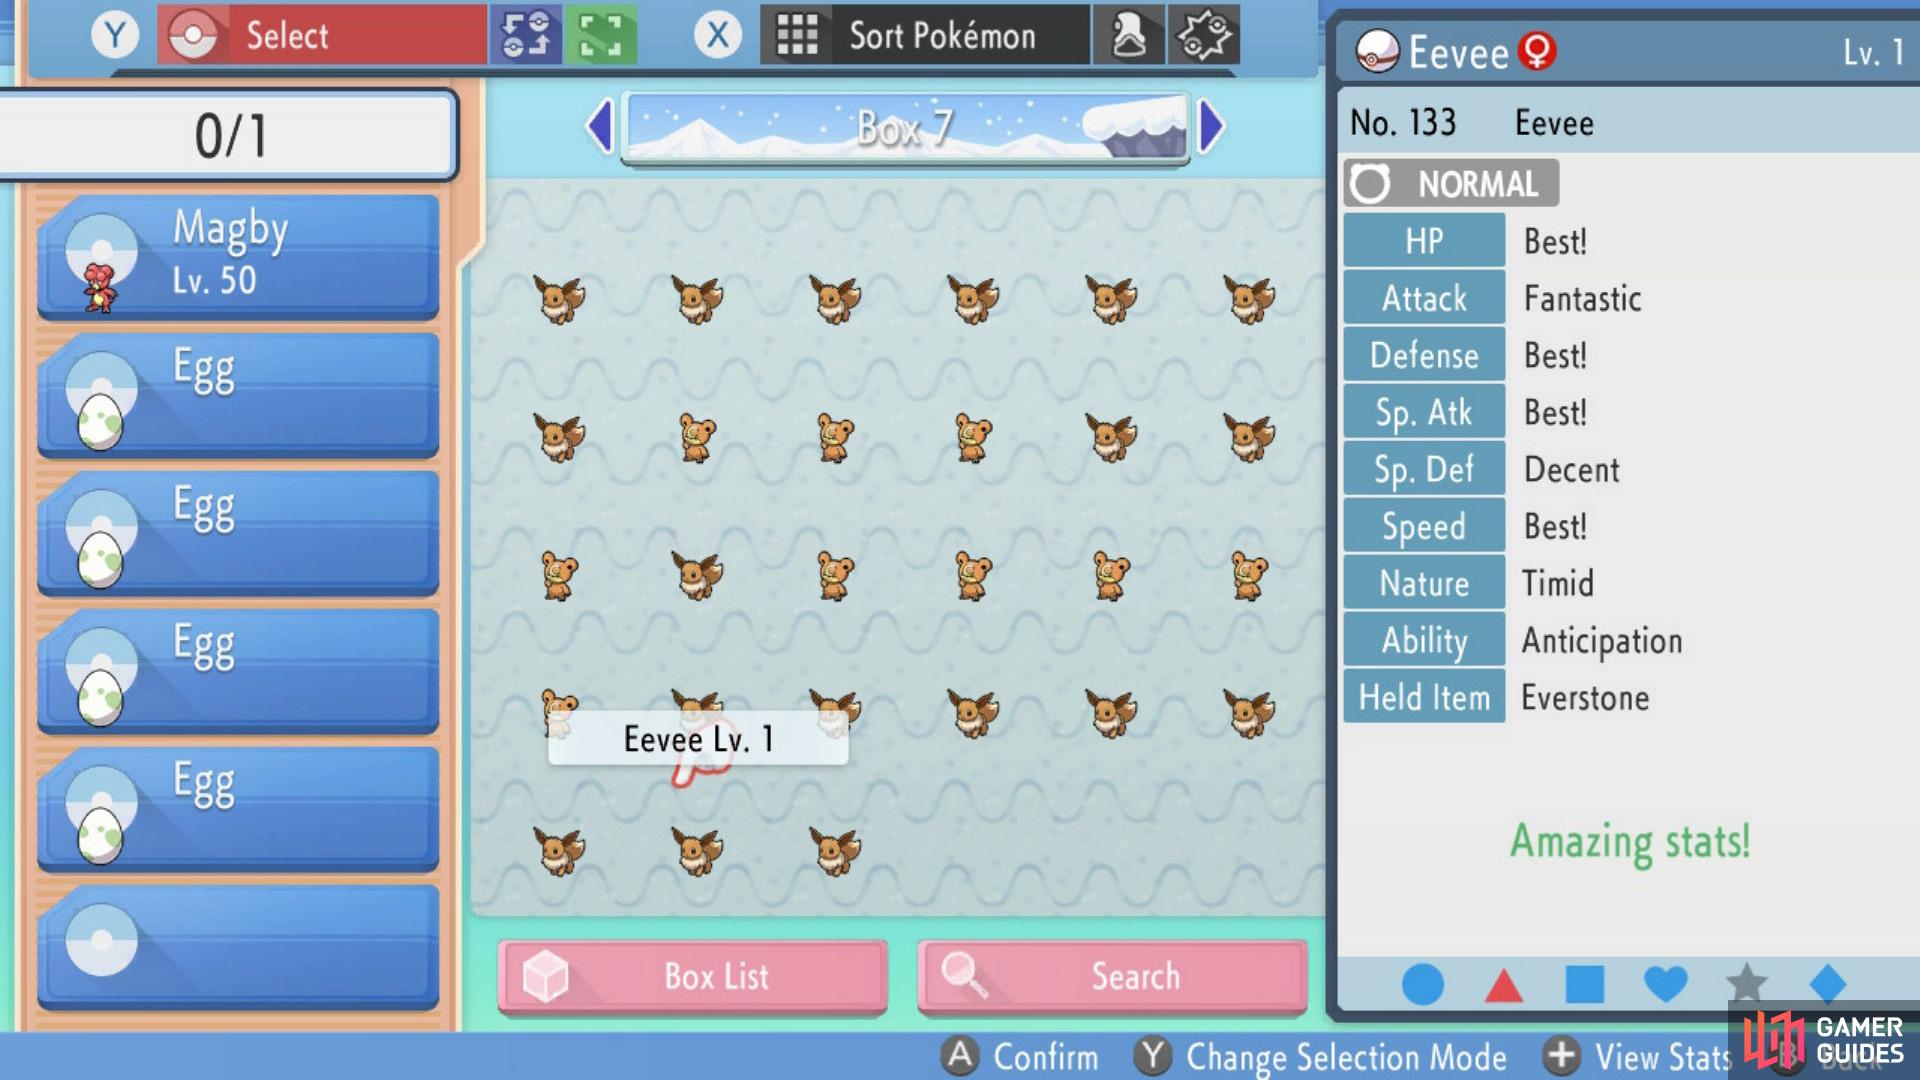 Here's our best female Eevee. Almost there…